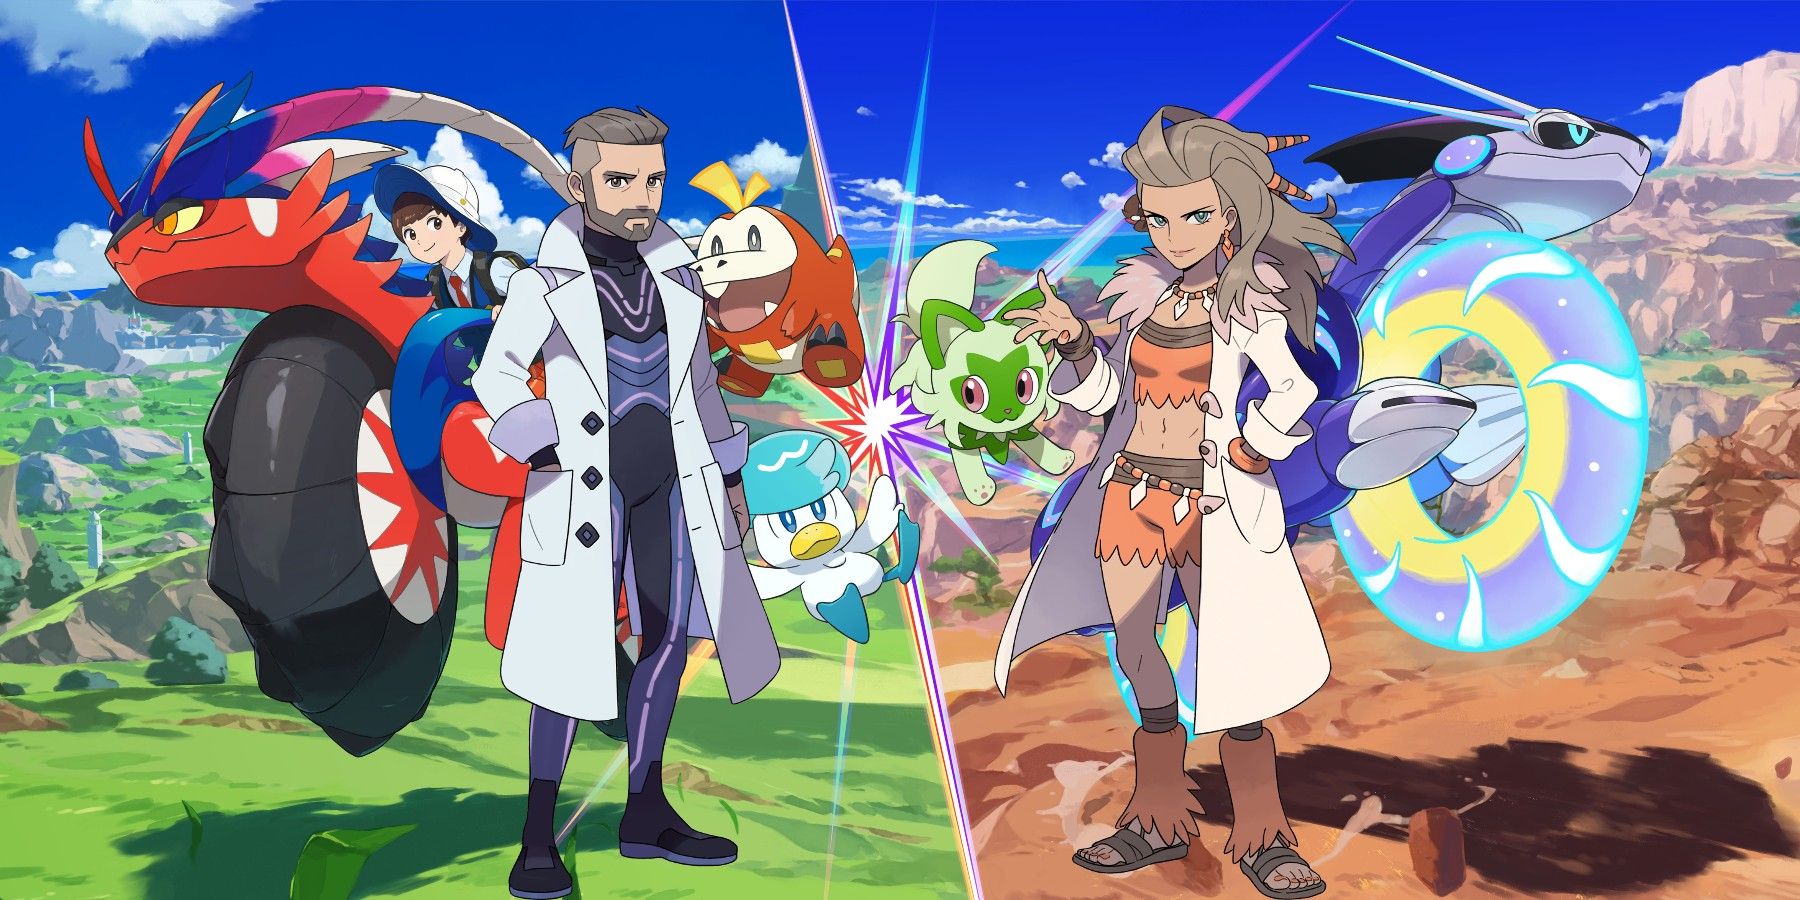 Key art for Pokémon Scarlet and Violet, with Professor Turo on the 'Scarlet' Side opposite Professor Sada on the 'Violet' side.